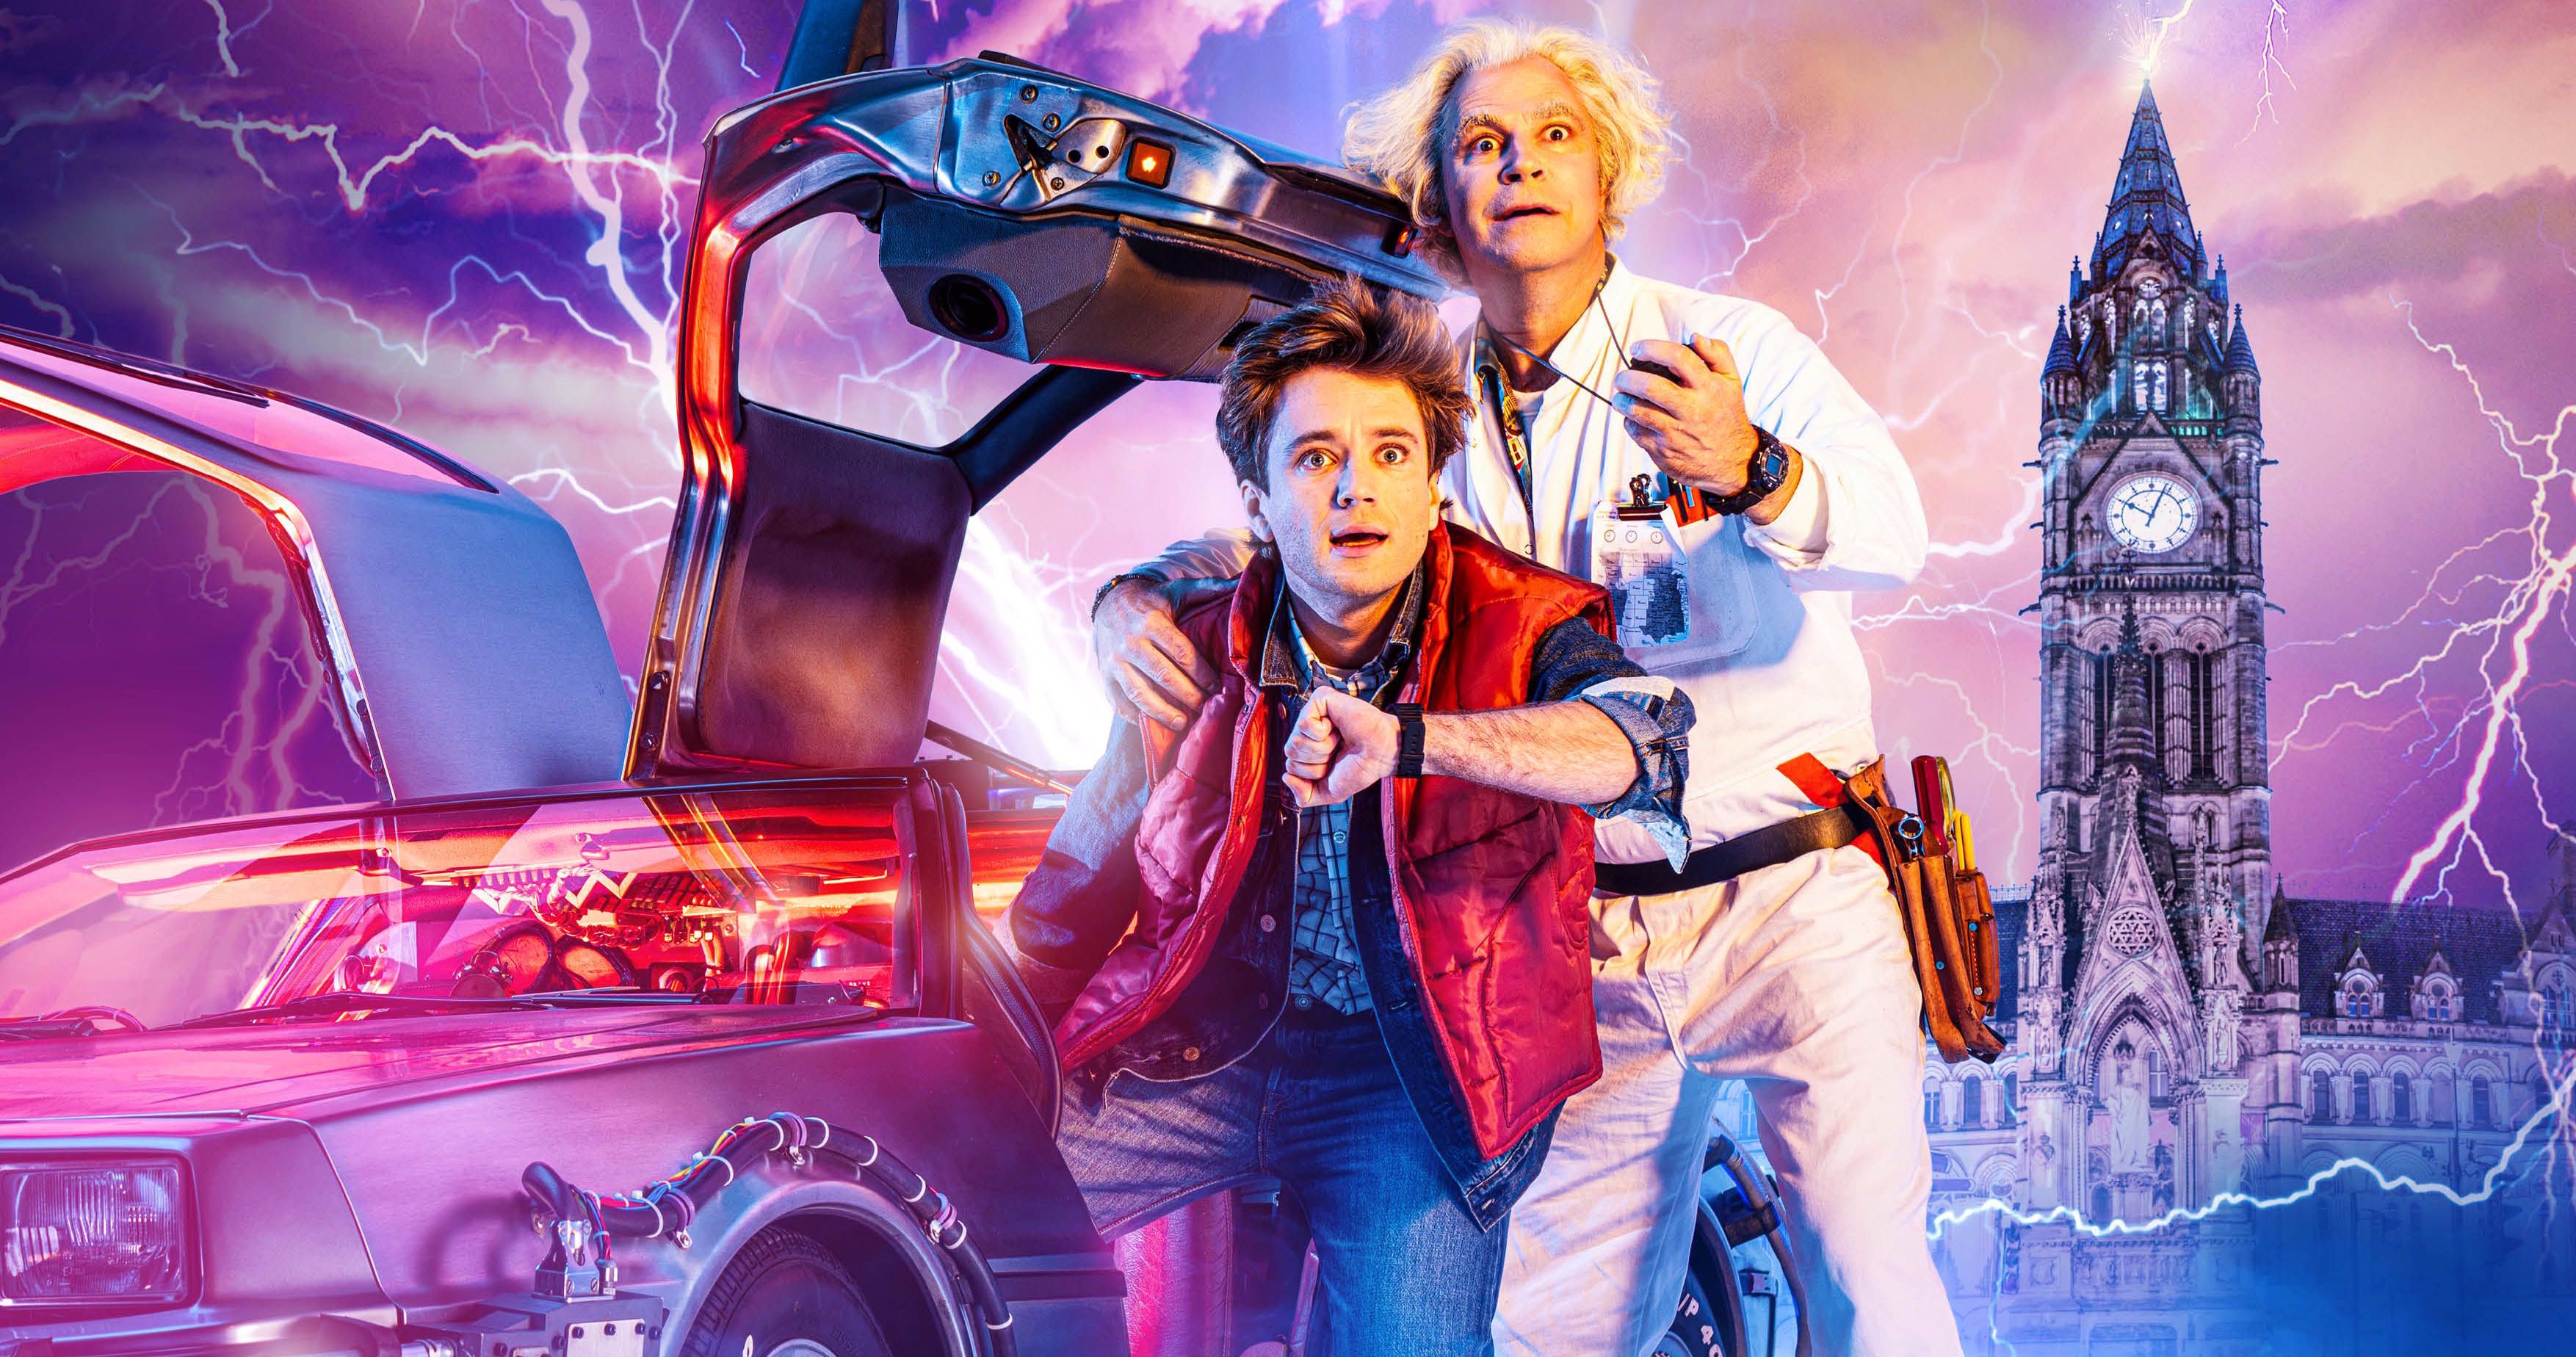 Back to The Future: The Musical First Look Brings Doc and Marty to The Stage